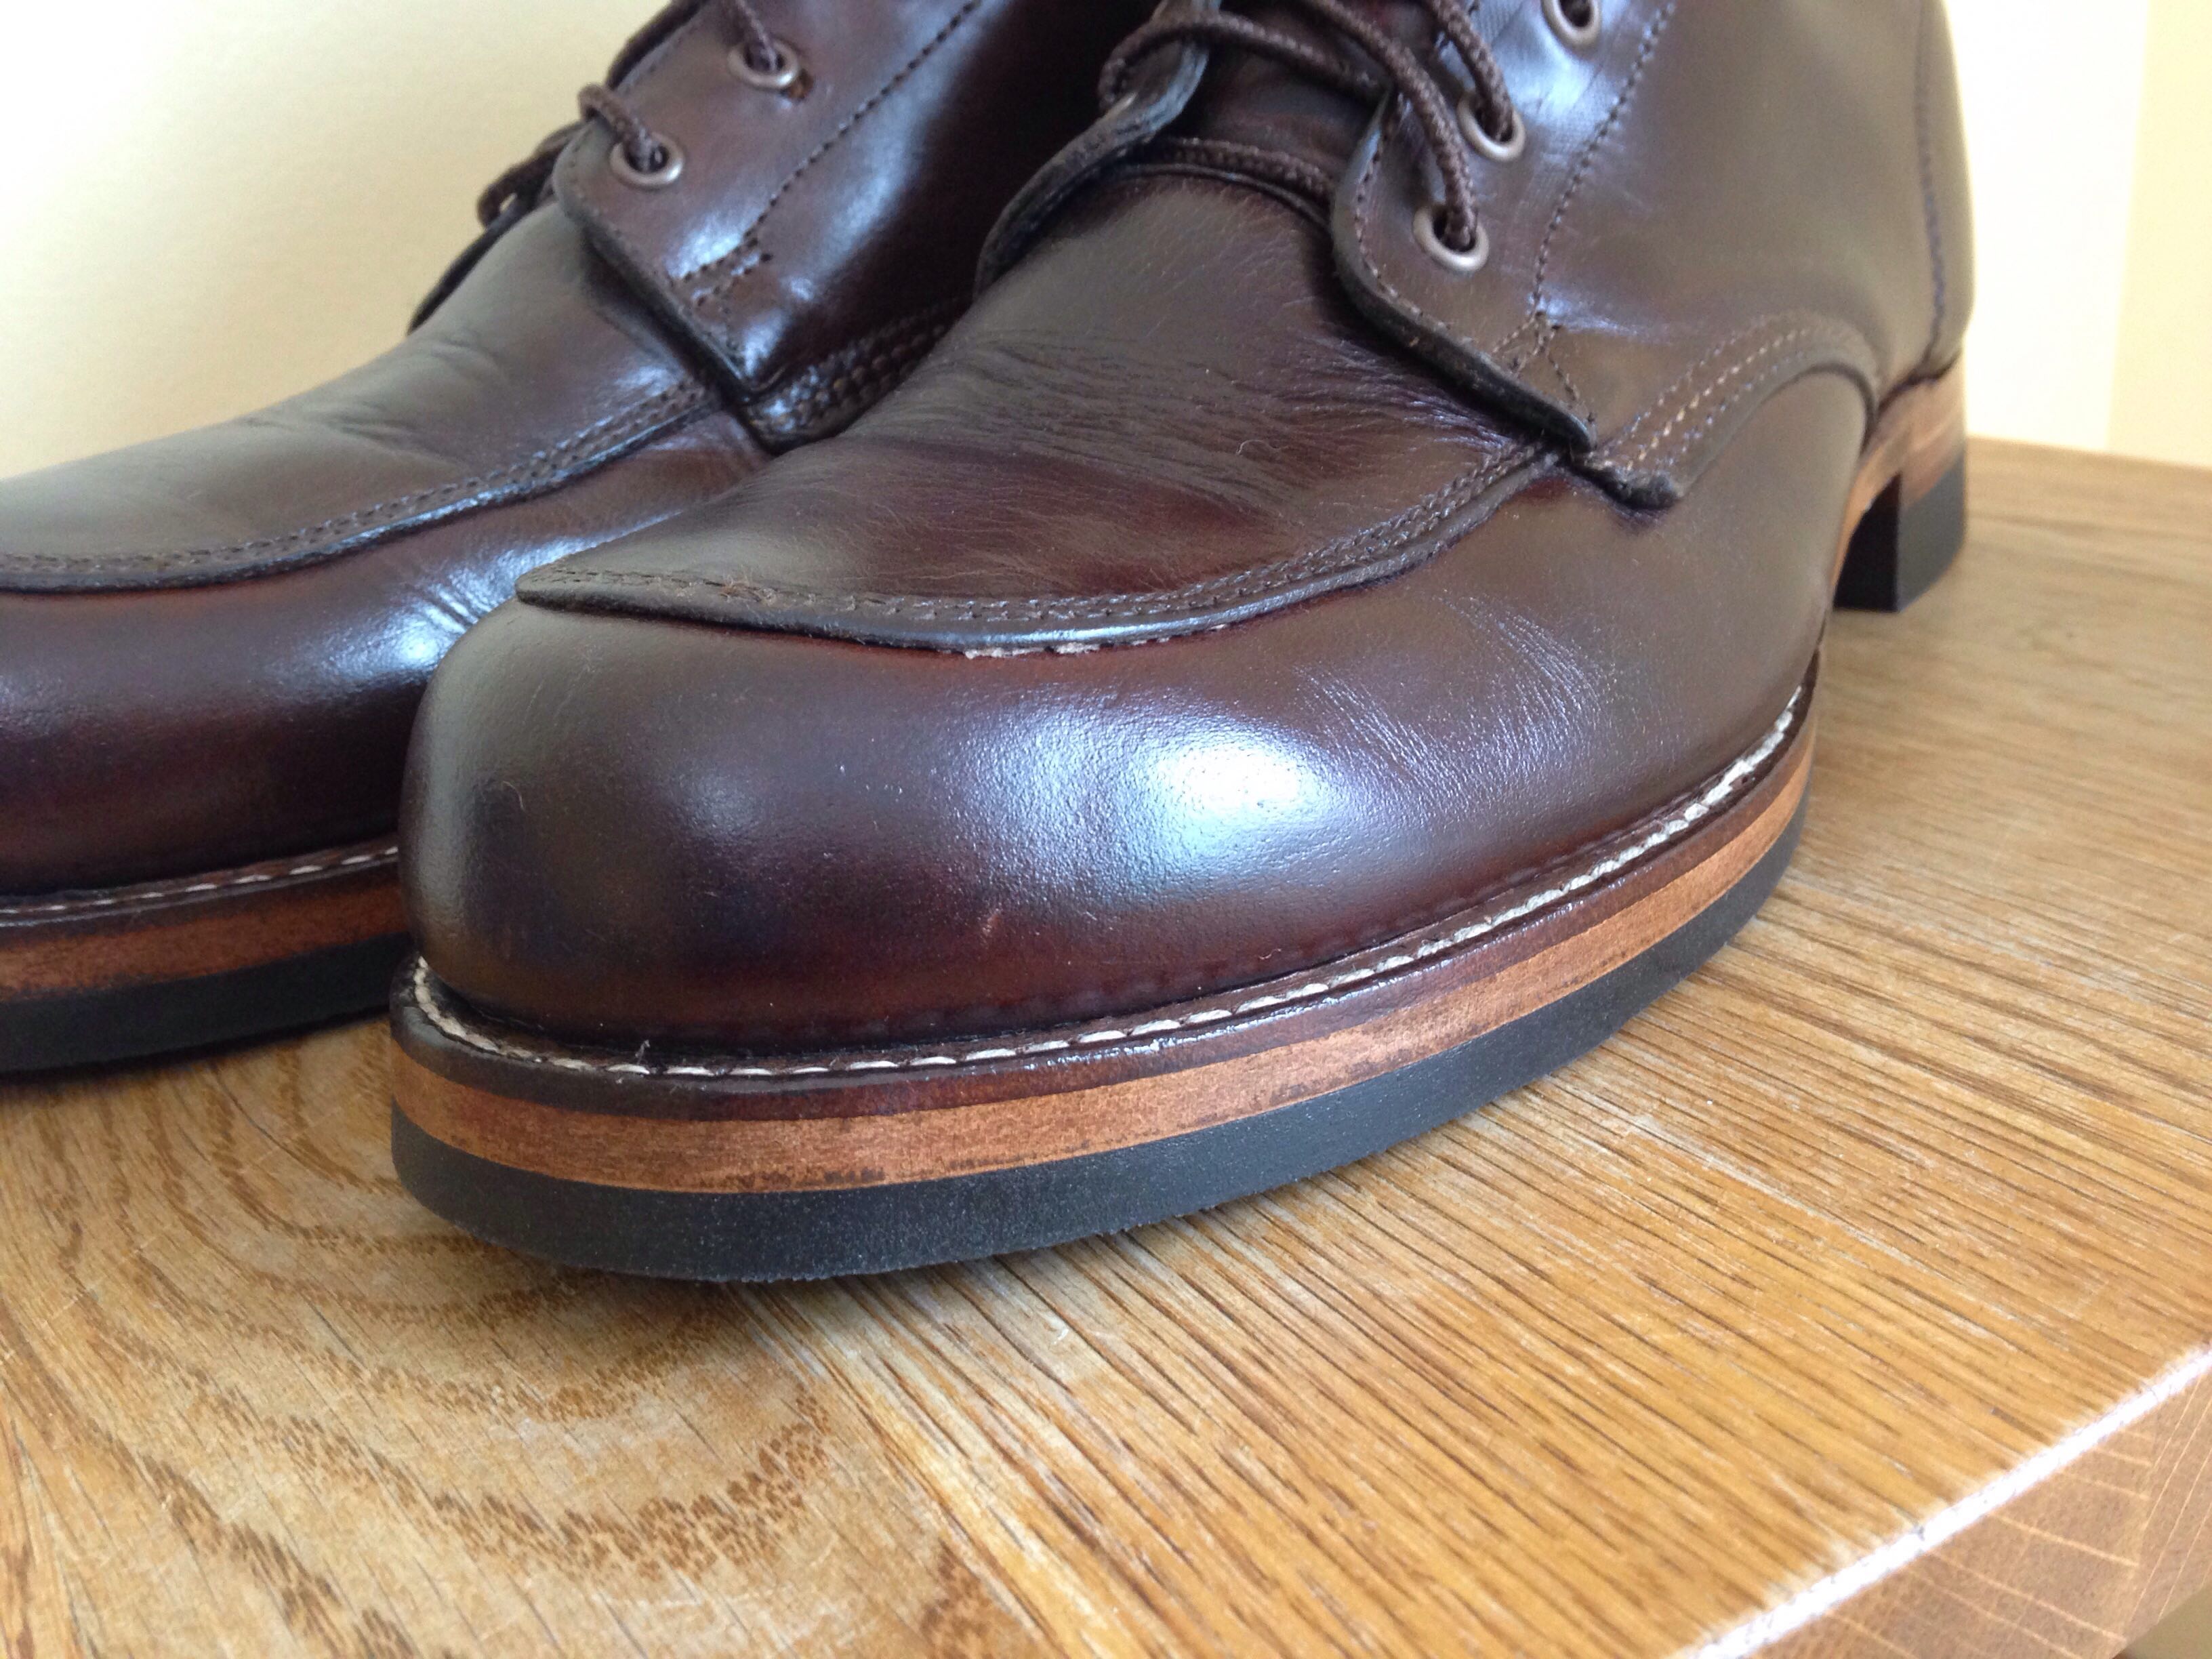 Wolverine 1000 mile boots resole recomendations | The Fedora Lounge